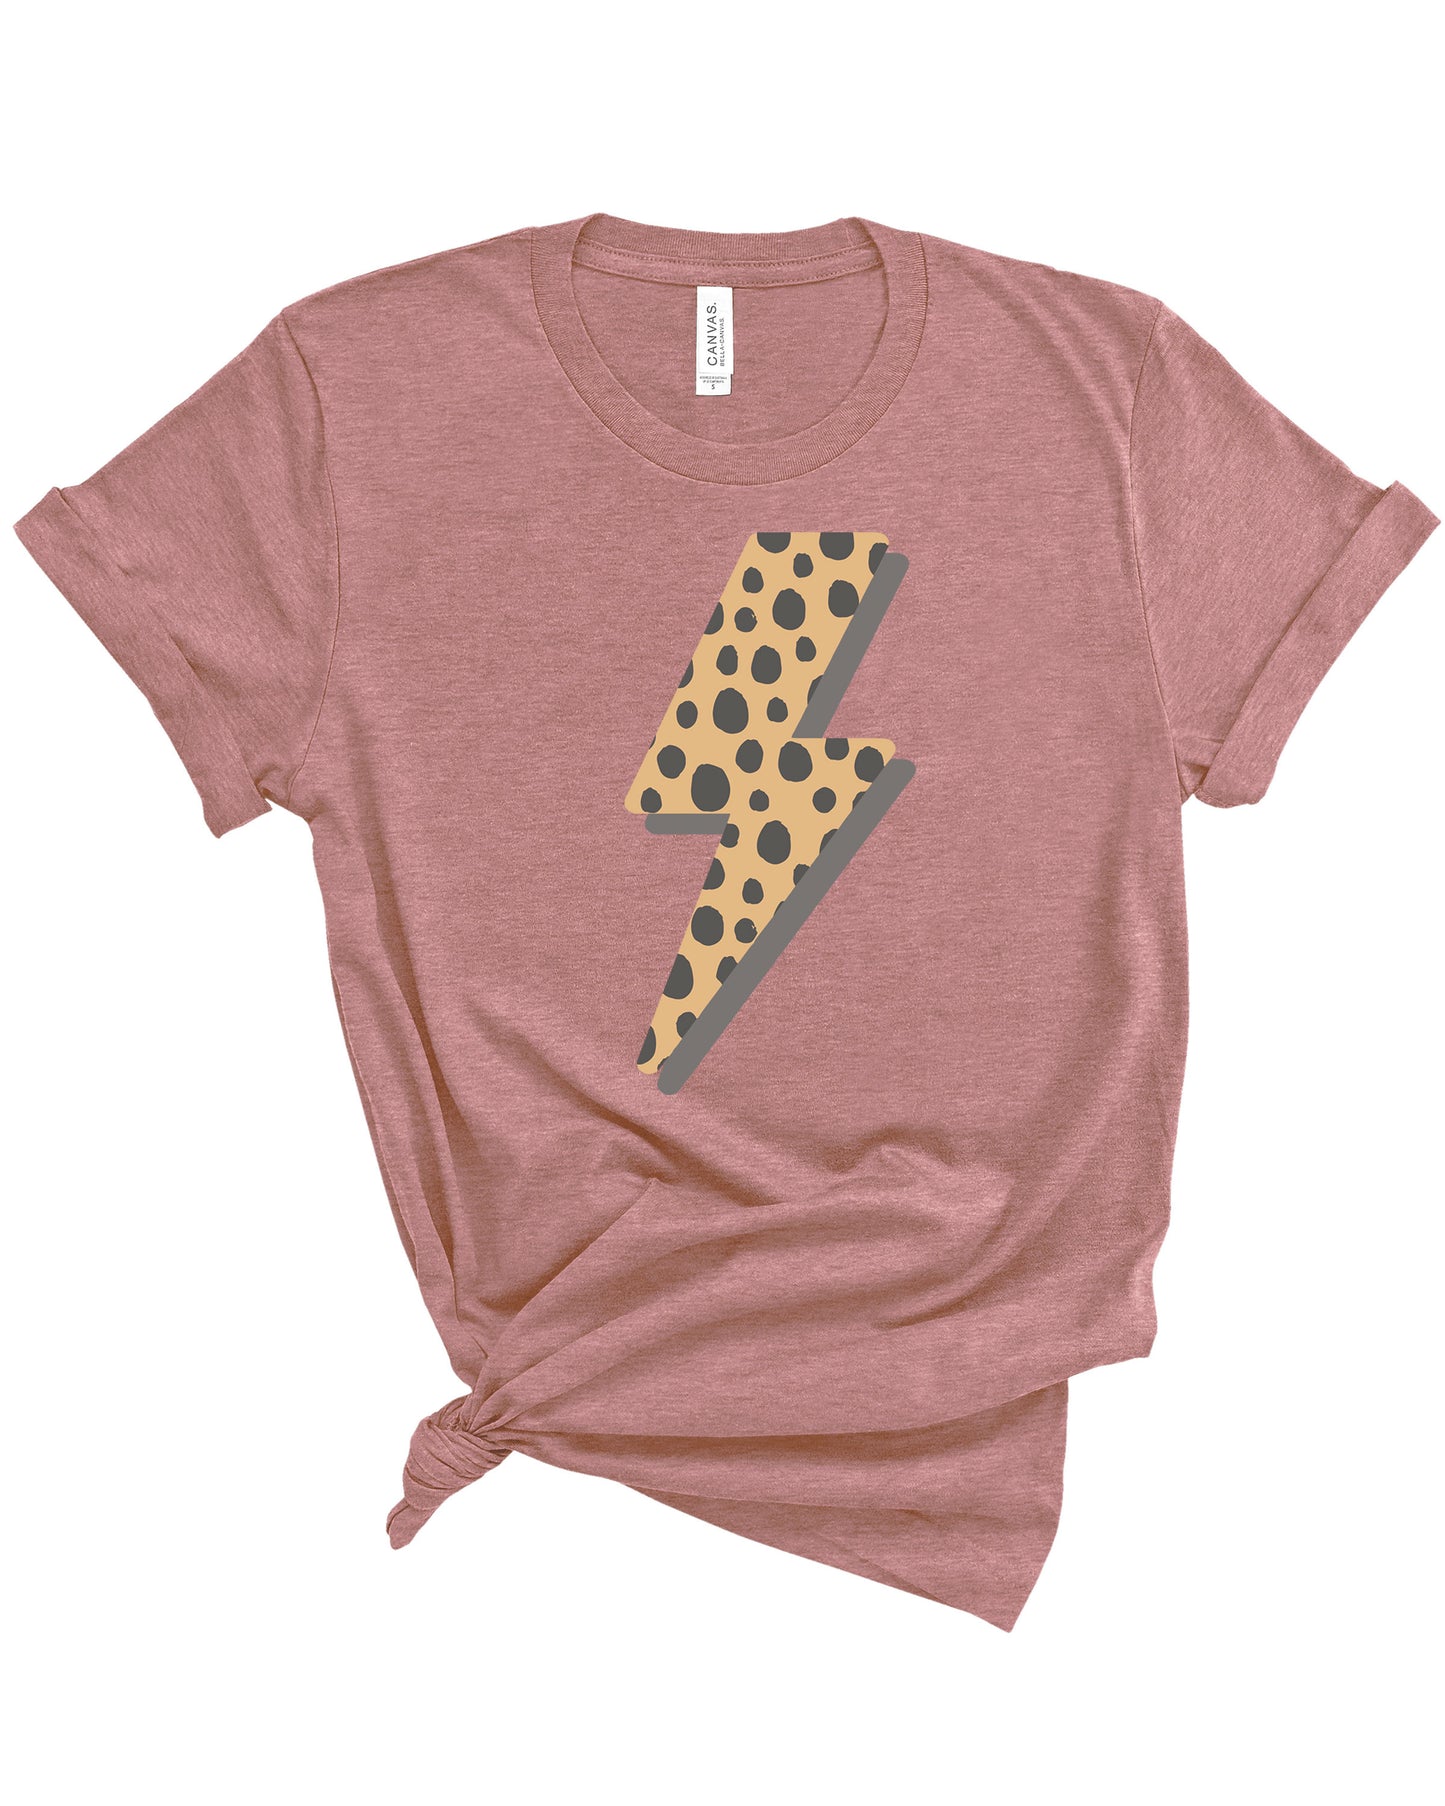 Cheetah Bolt | Adult Tee | RTS-Adult Tee-Sister Shirts-Sister Shirts, Cute & Custom Tees for Mama & Littles in Trussville, Alabama.